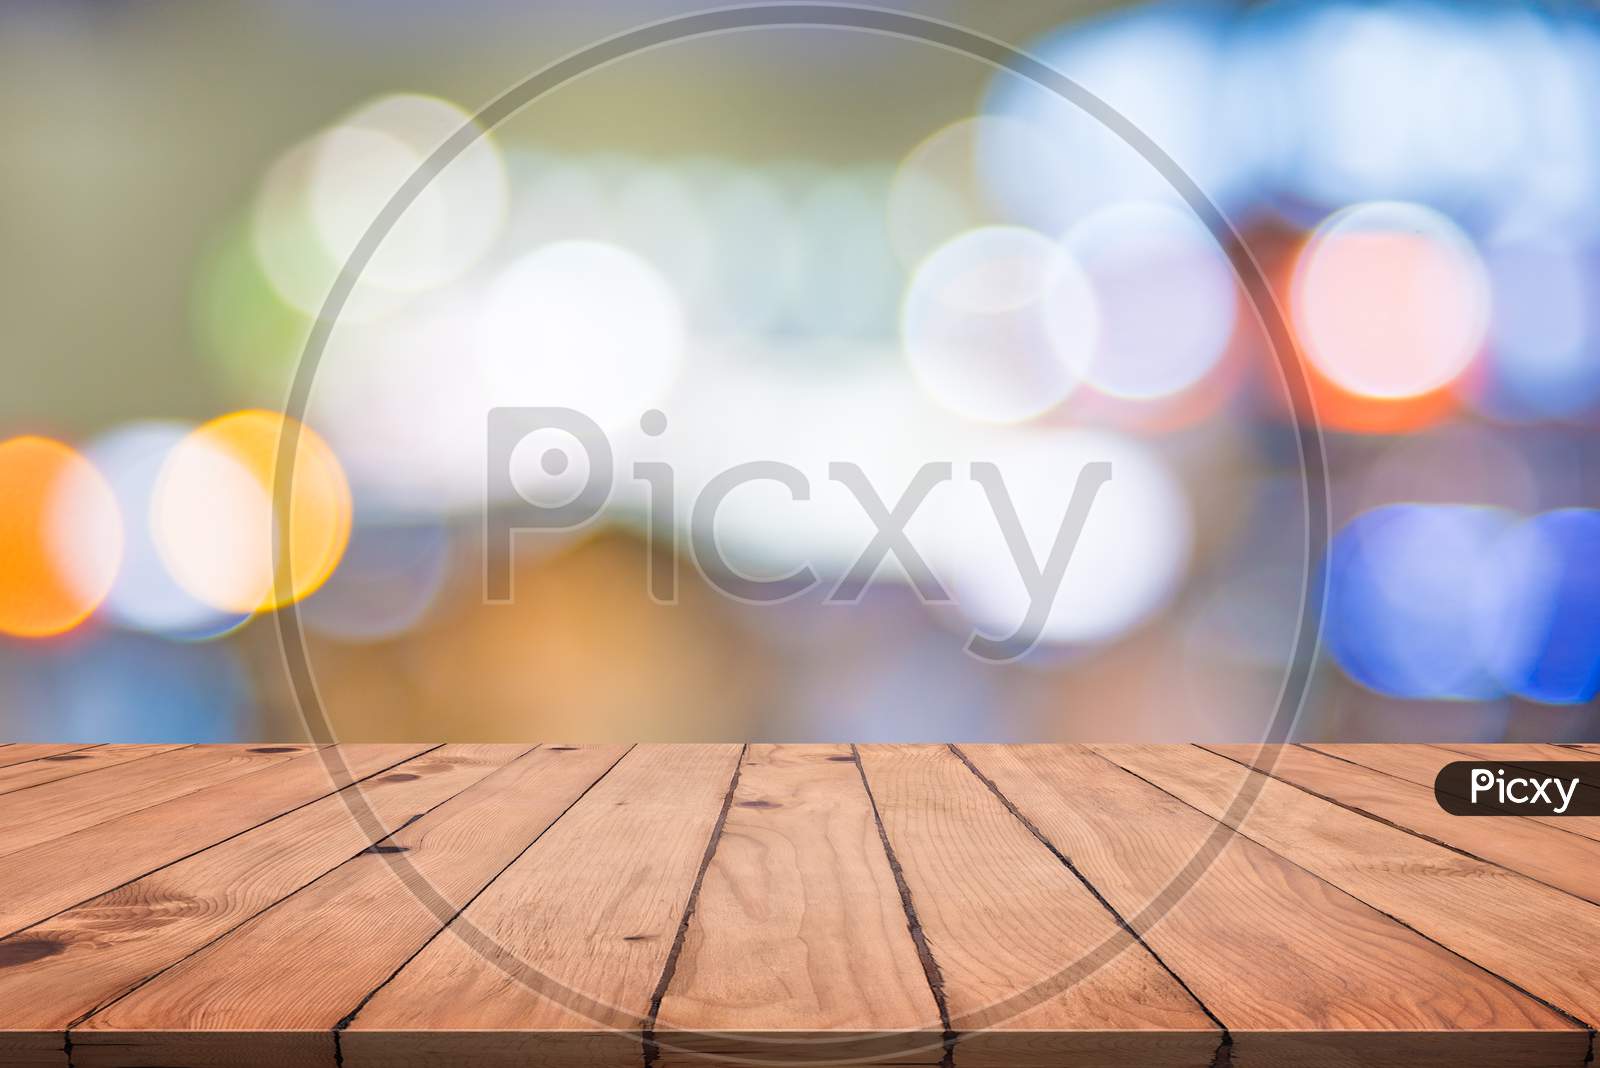 Empty Wood Table With Colorful Abstract Bokeh. Wallpaper And Texture Concept. City Light And Product Stage Showing Theme. Presentation Template